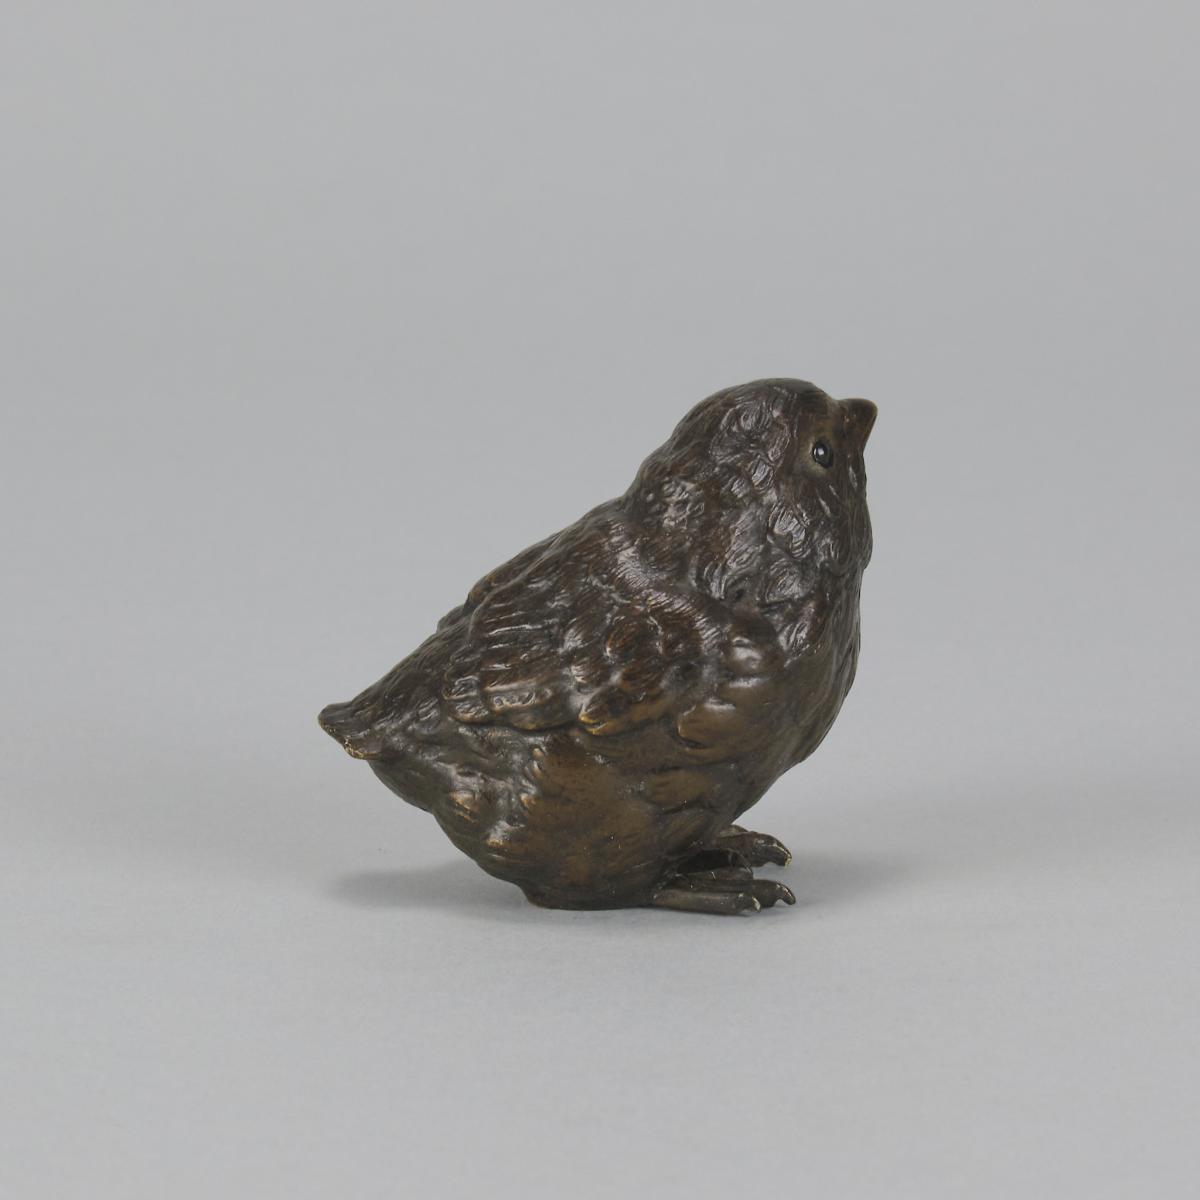 Early 20th Century Cold-Painted Vienna Bronze entitled "Young Bird" 